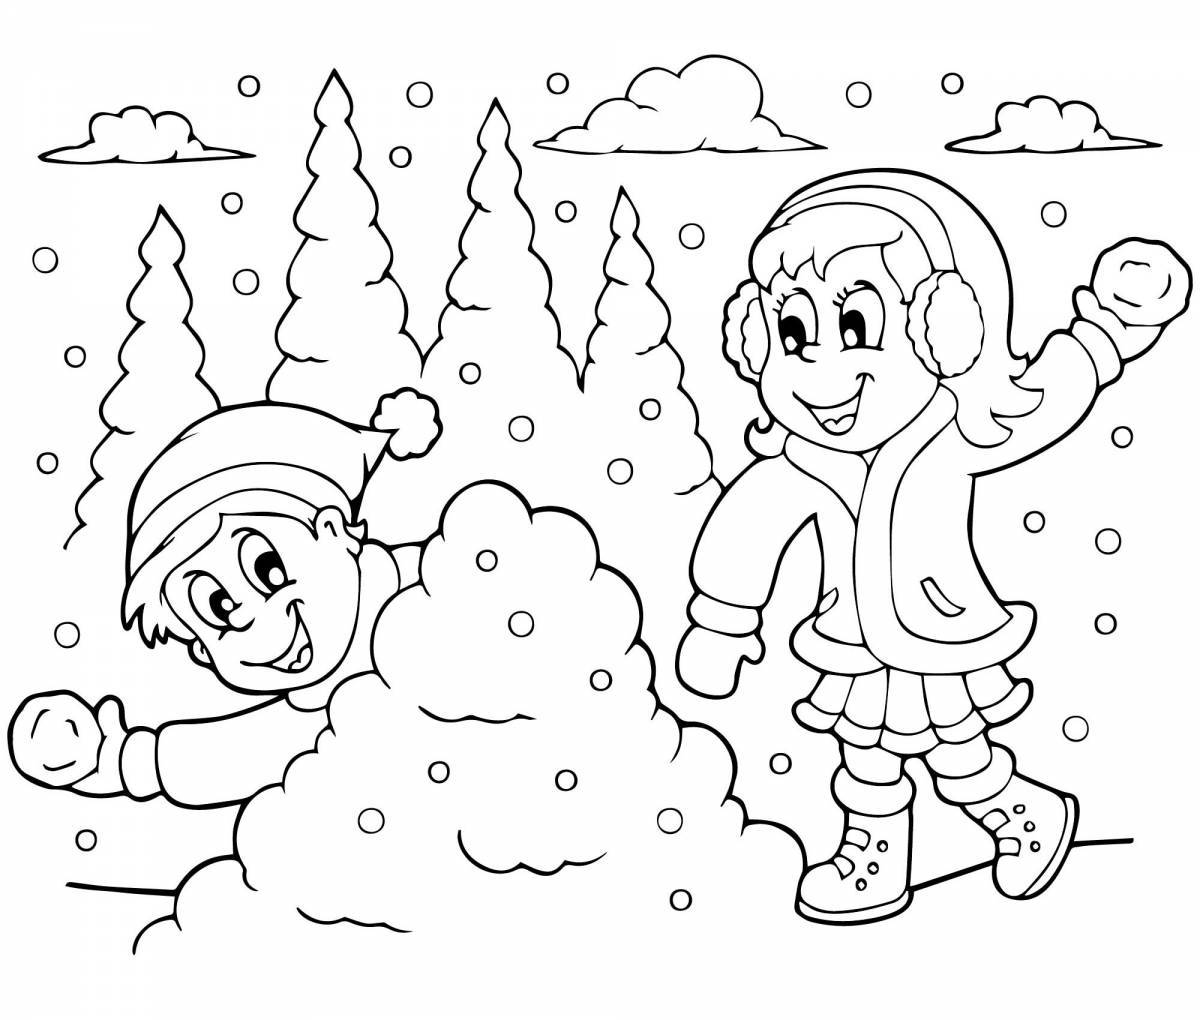 Violent coloring for children winter fun 5-6 years